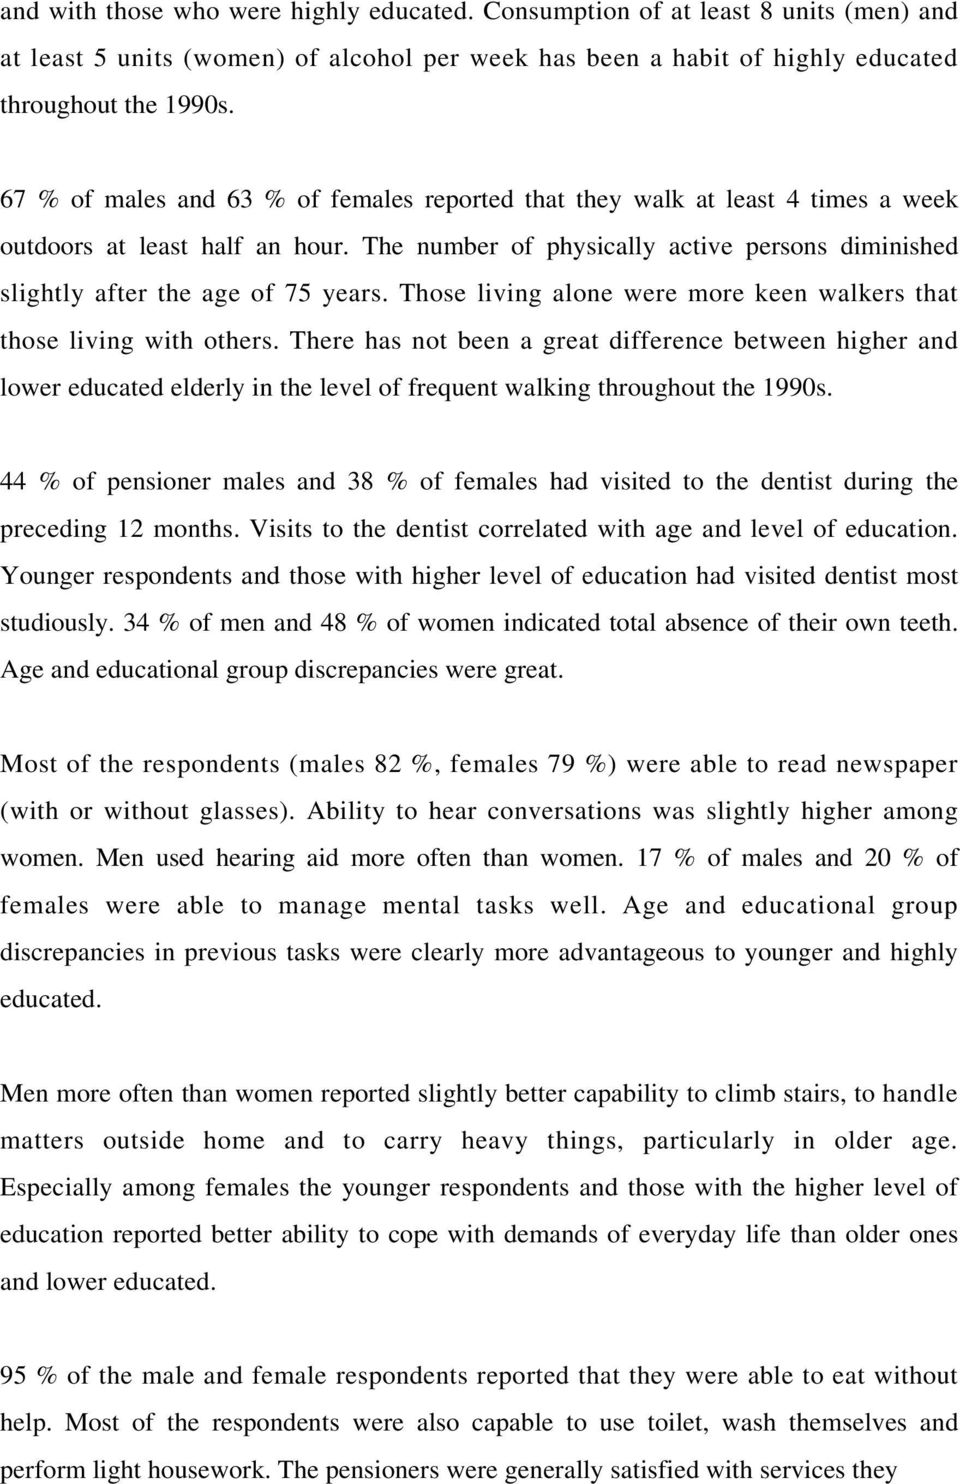 Those living alone were more keen walkers that those living with. There has not been a great difference between higher and lower educated elderly in the level of frequent walking throughout the 1990s.